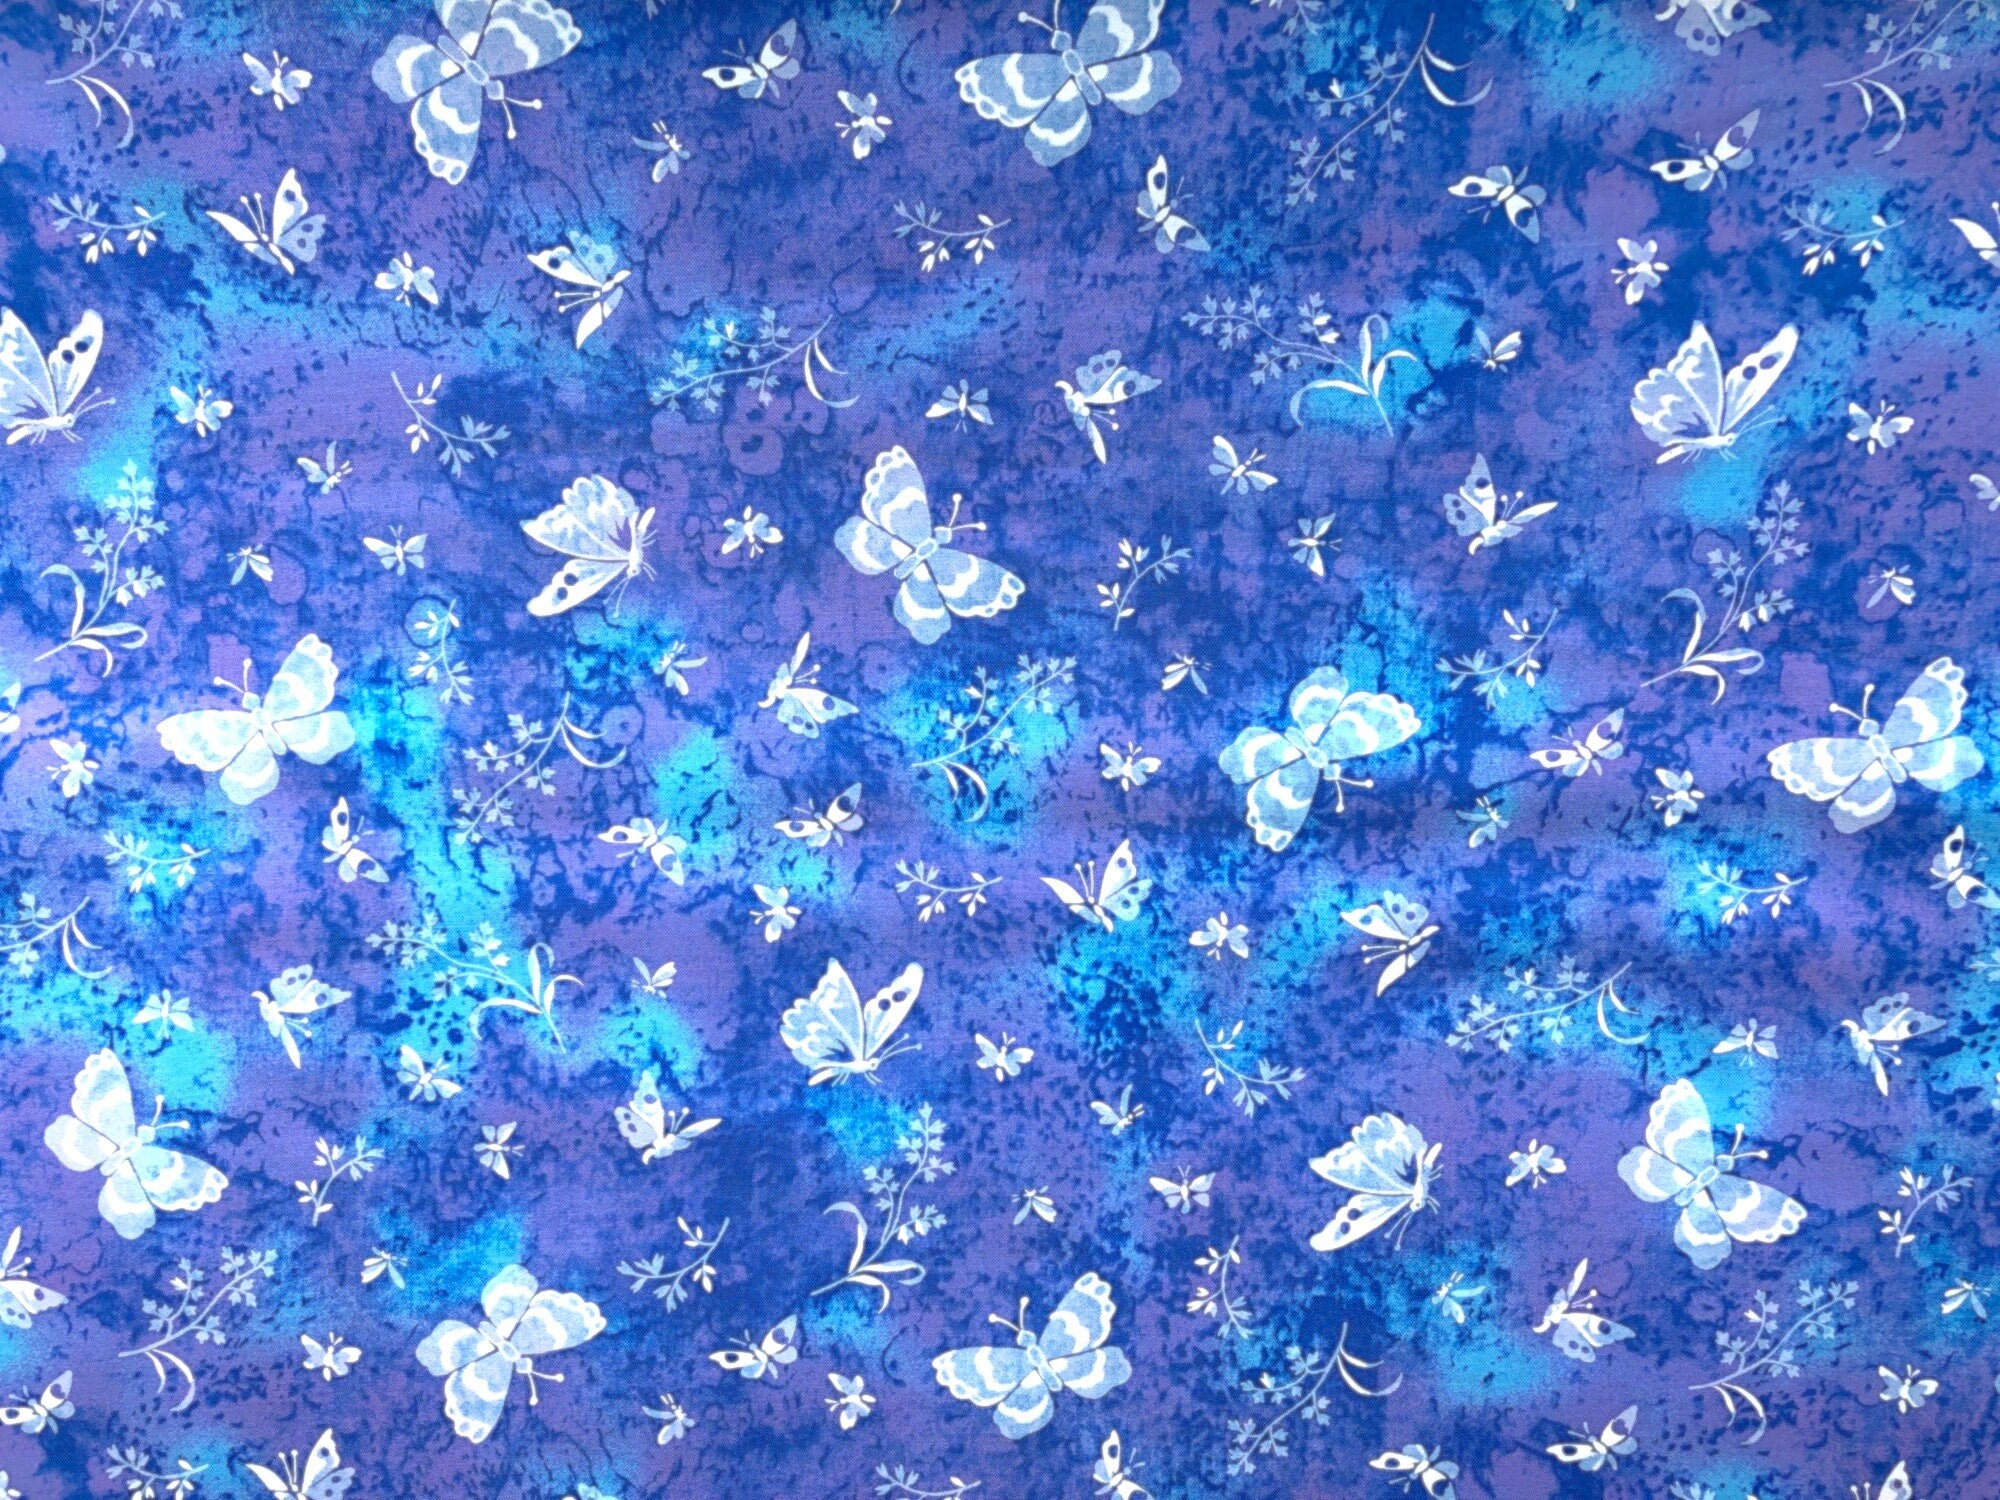 This fabric is covered with different sized white butterflies. The background is a mixture of various shades of blue and lavender.